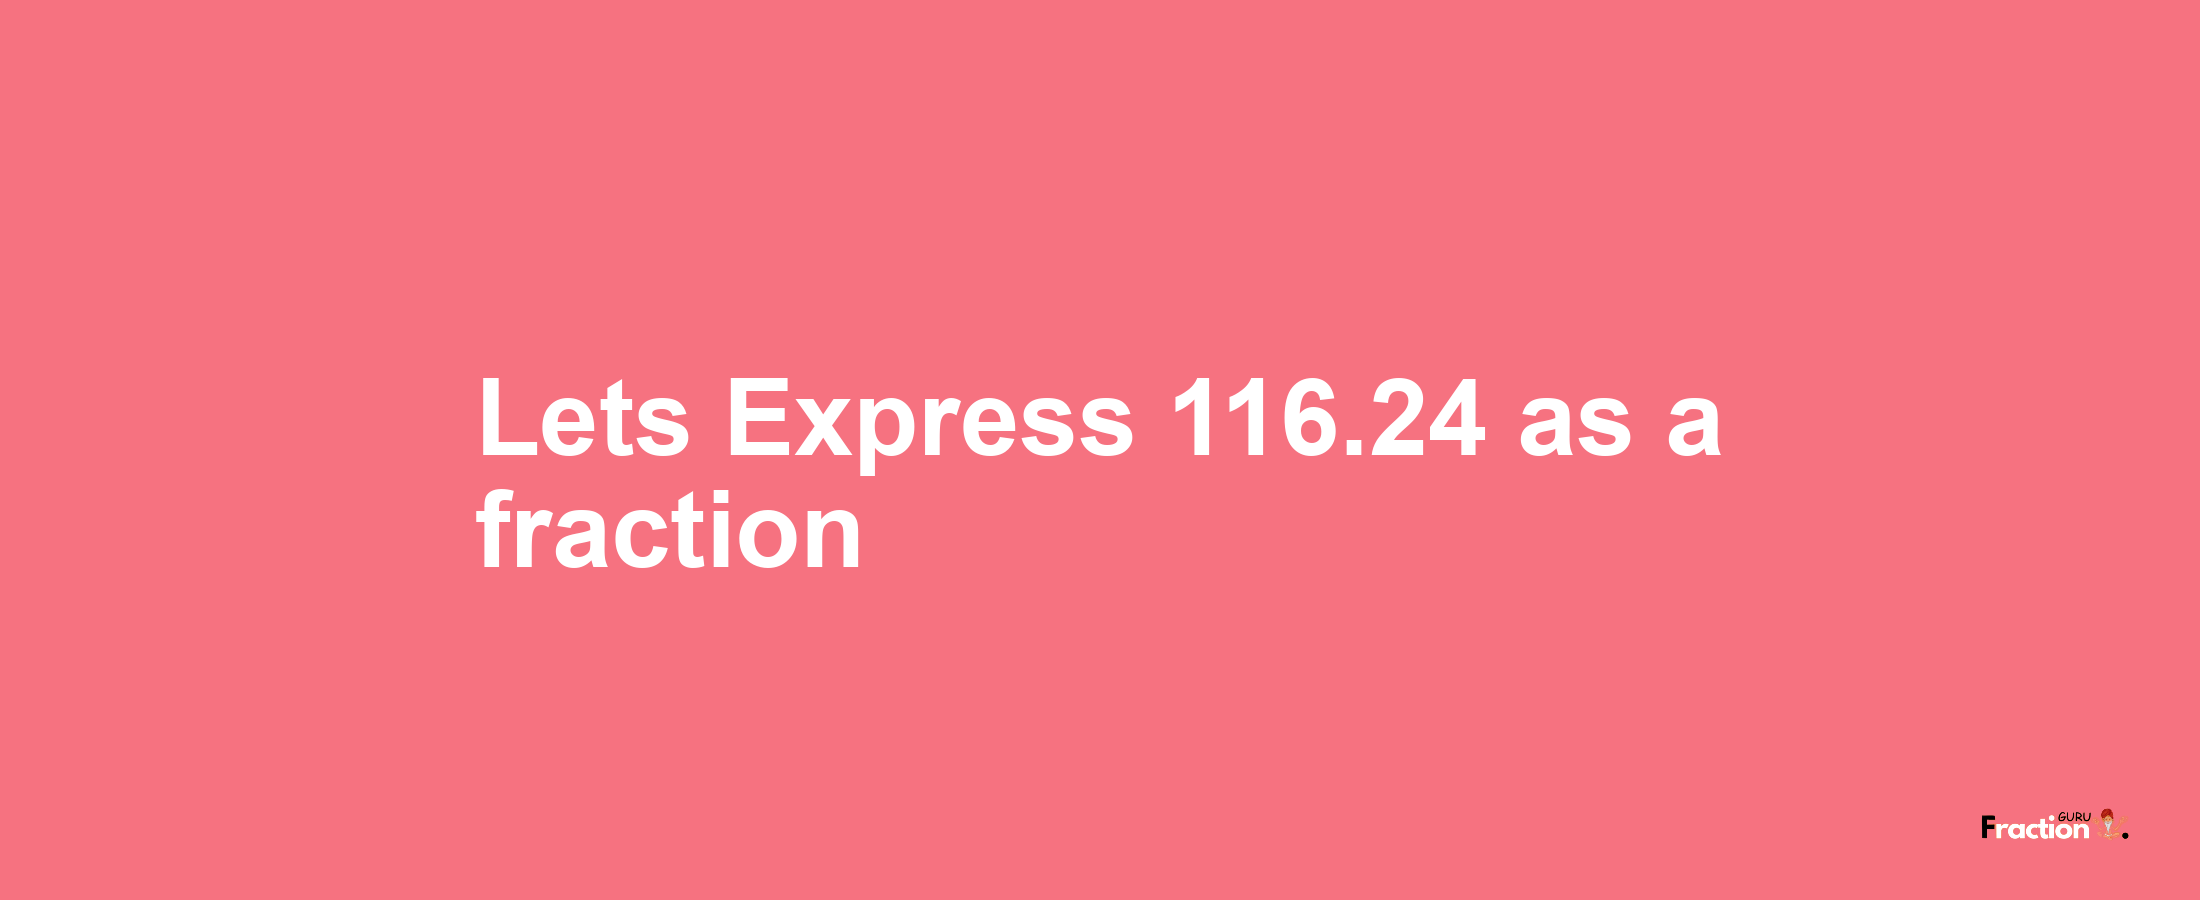 Lets Express 116.24 as afraction